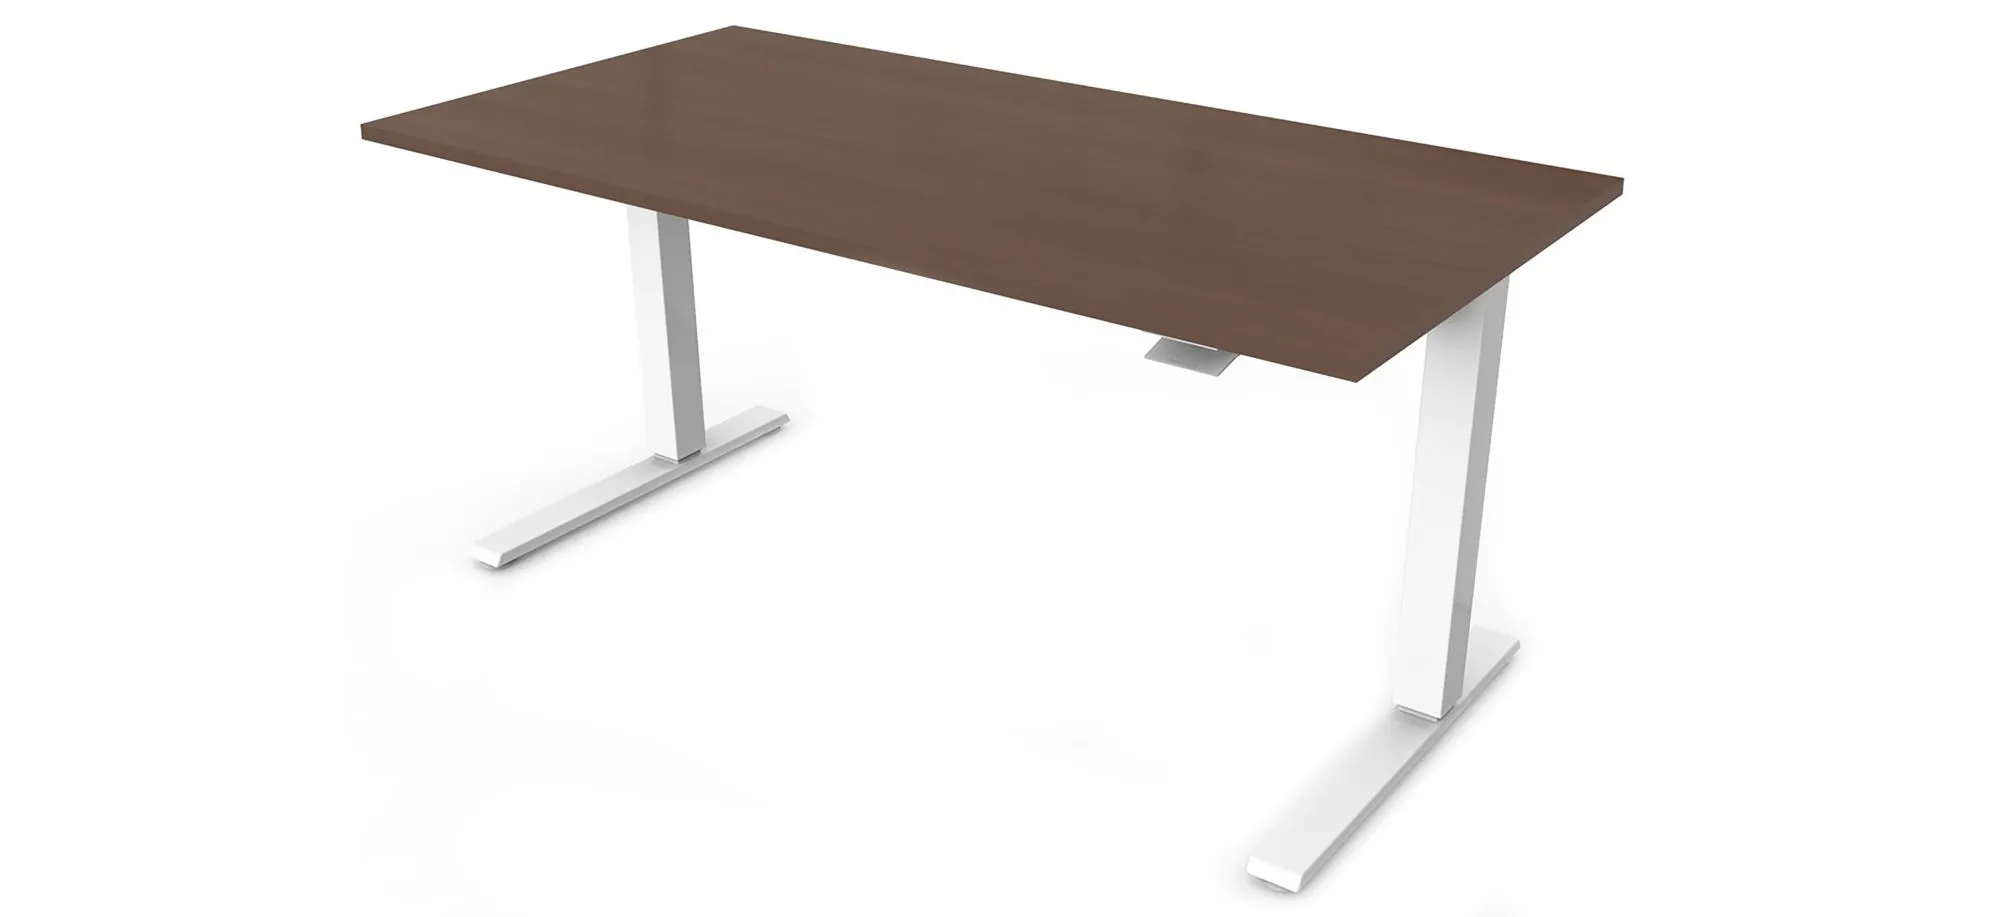 Humanscale Float 60" Adjustable Sit/Stand Computer Desk in Walnut Top w/White Base by Humanscaleoration